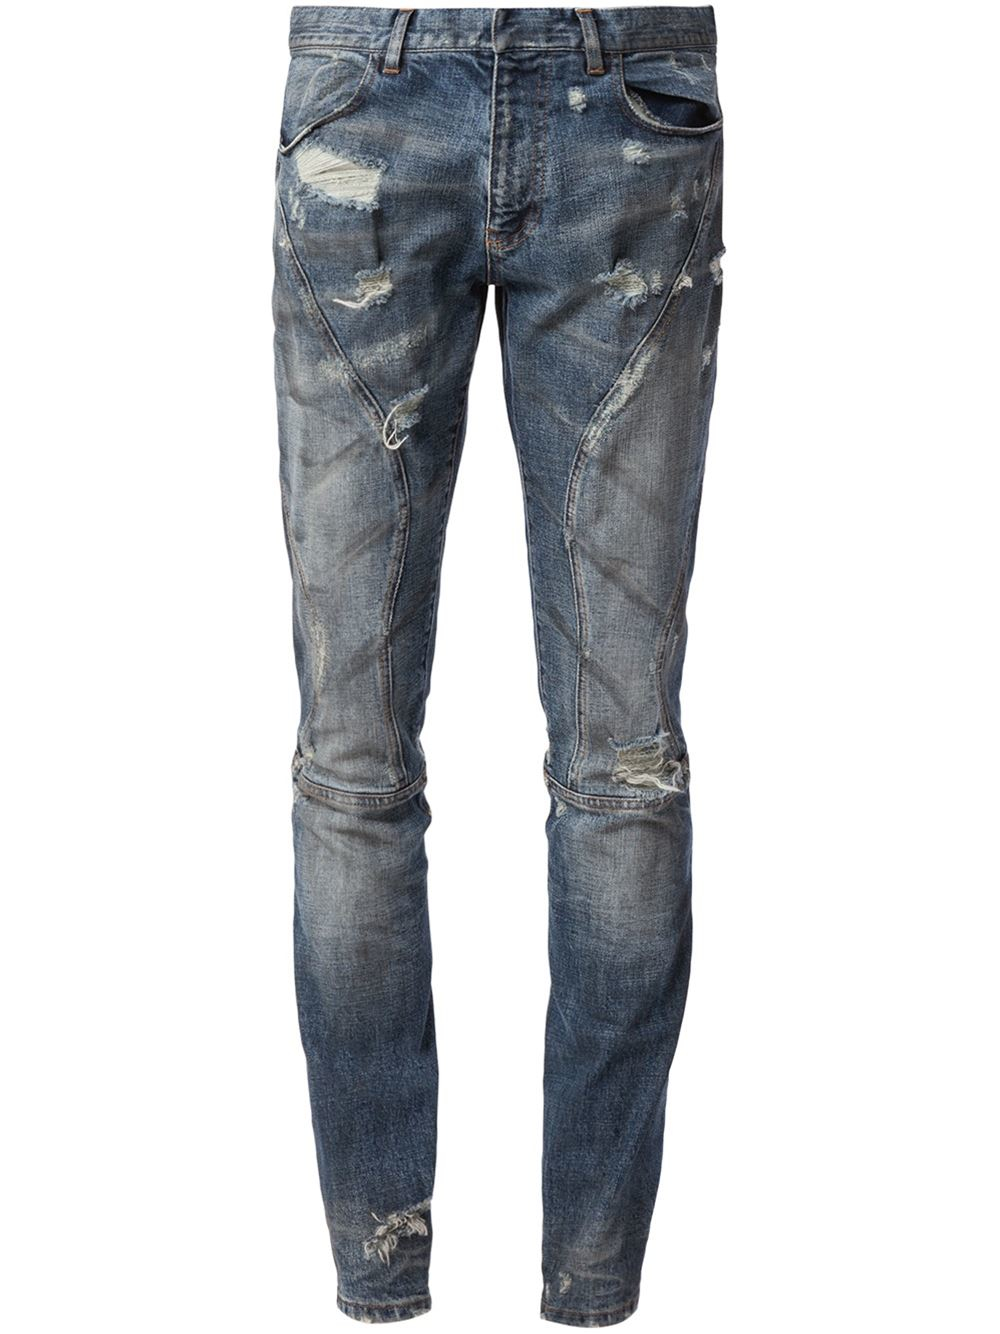 Faith Connexion Distressed Slim Jeans in Blue for Men - Lyst